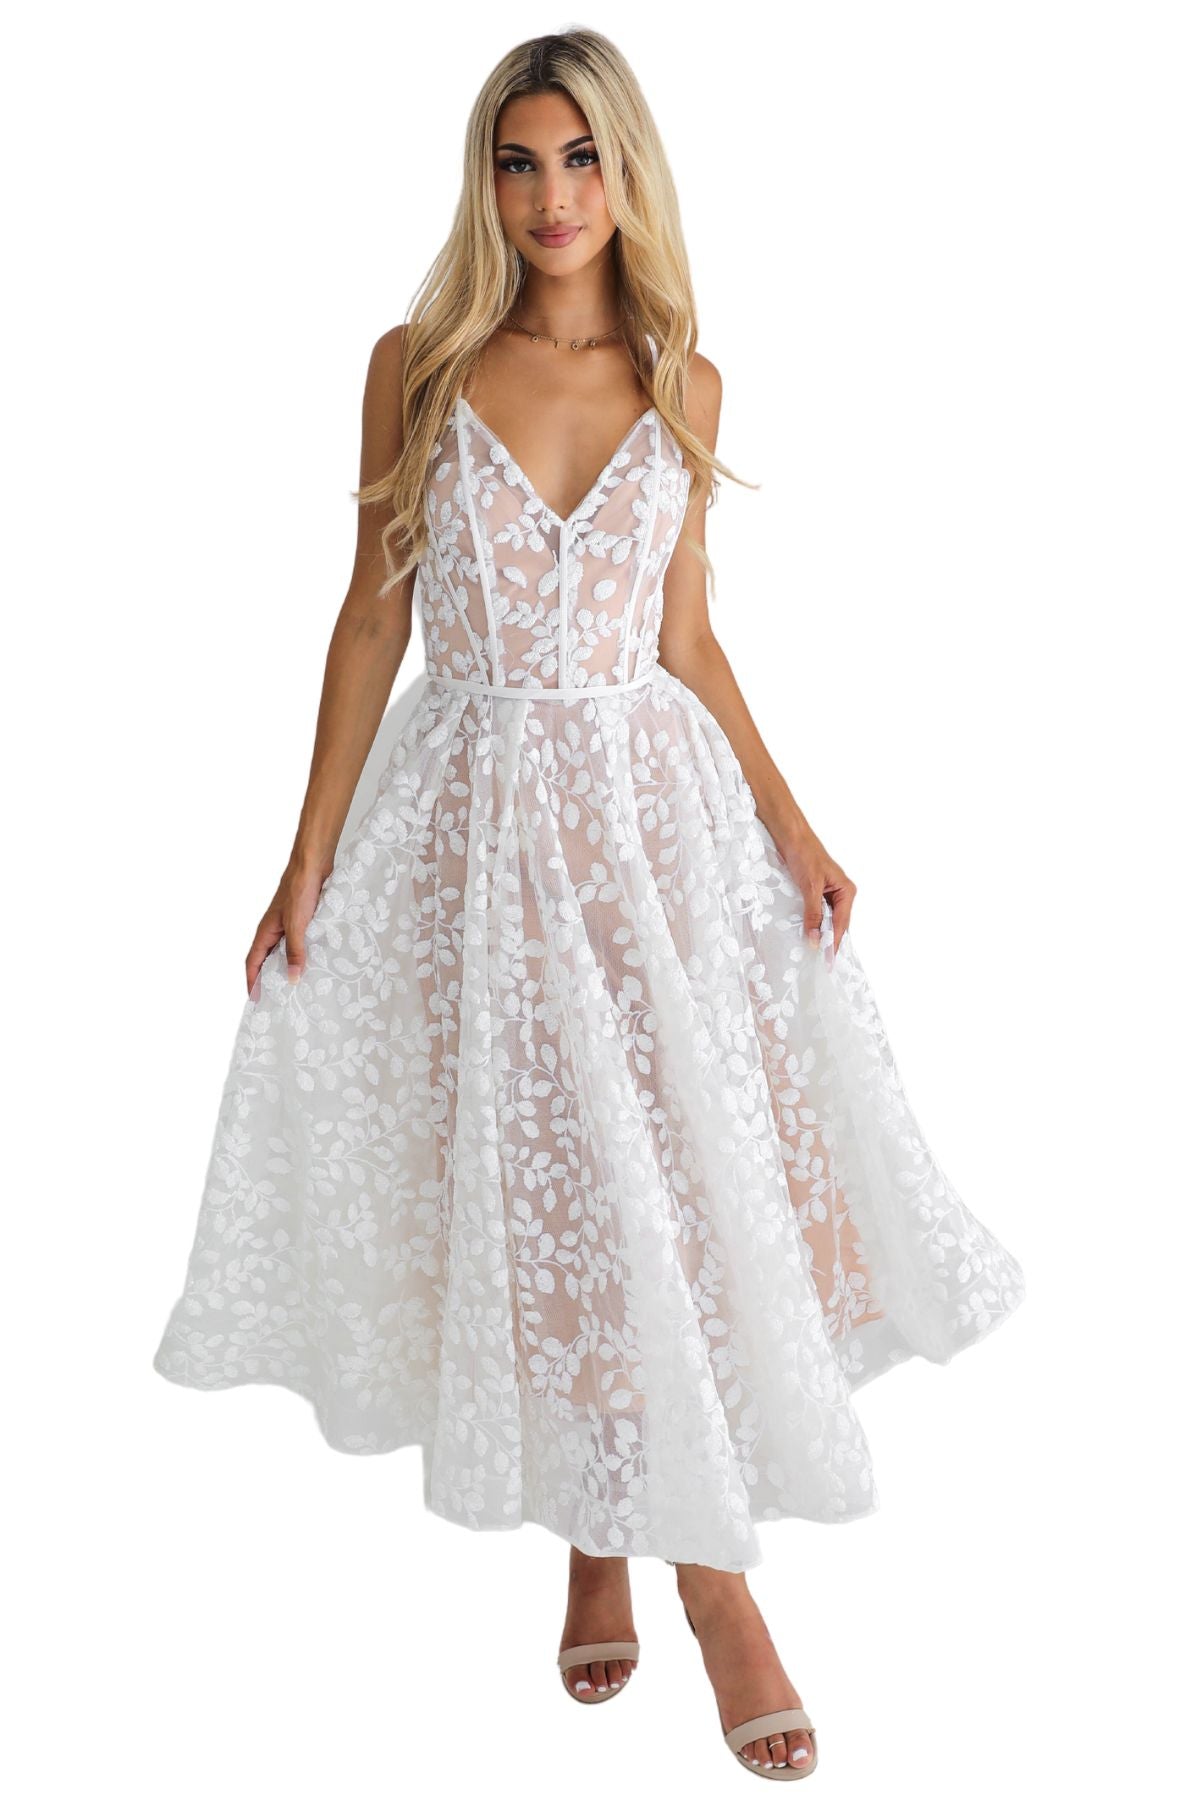 Tina Holly TINAHOLLY Isabella Gown TK068 (White/Nude) - RRP $499 - 1_9eefe44a-5f85-41cb-87cf-1f21a27e08ef.jpg